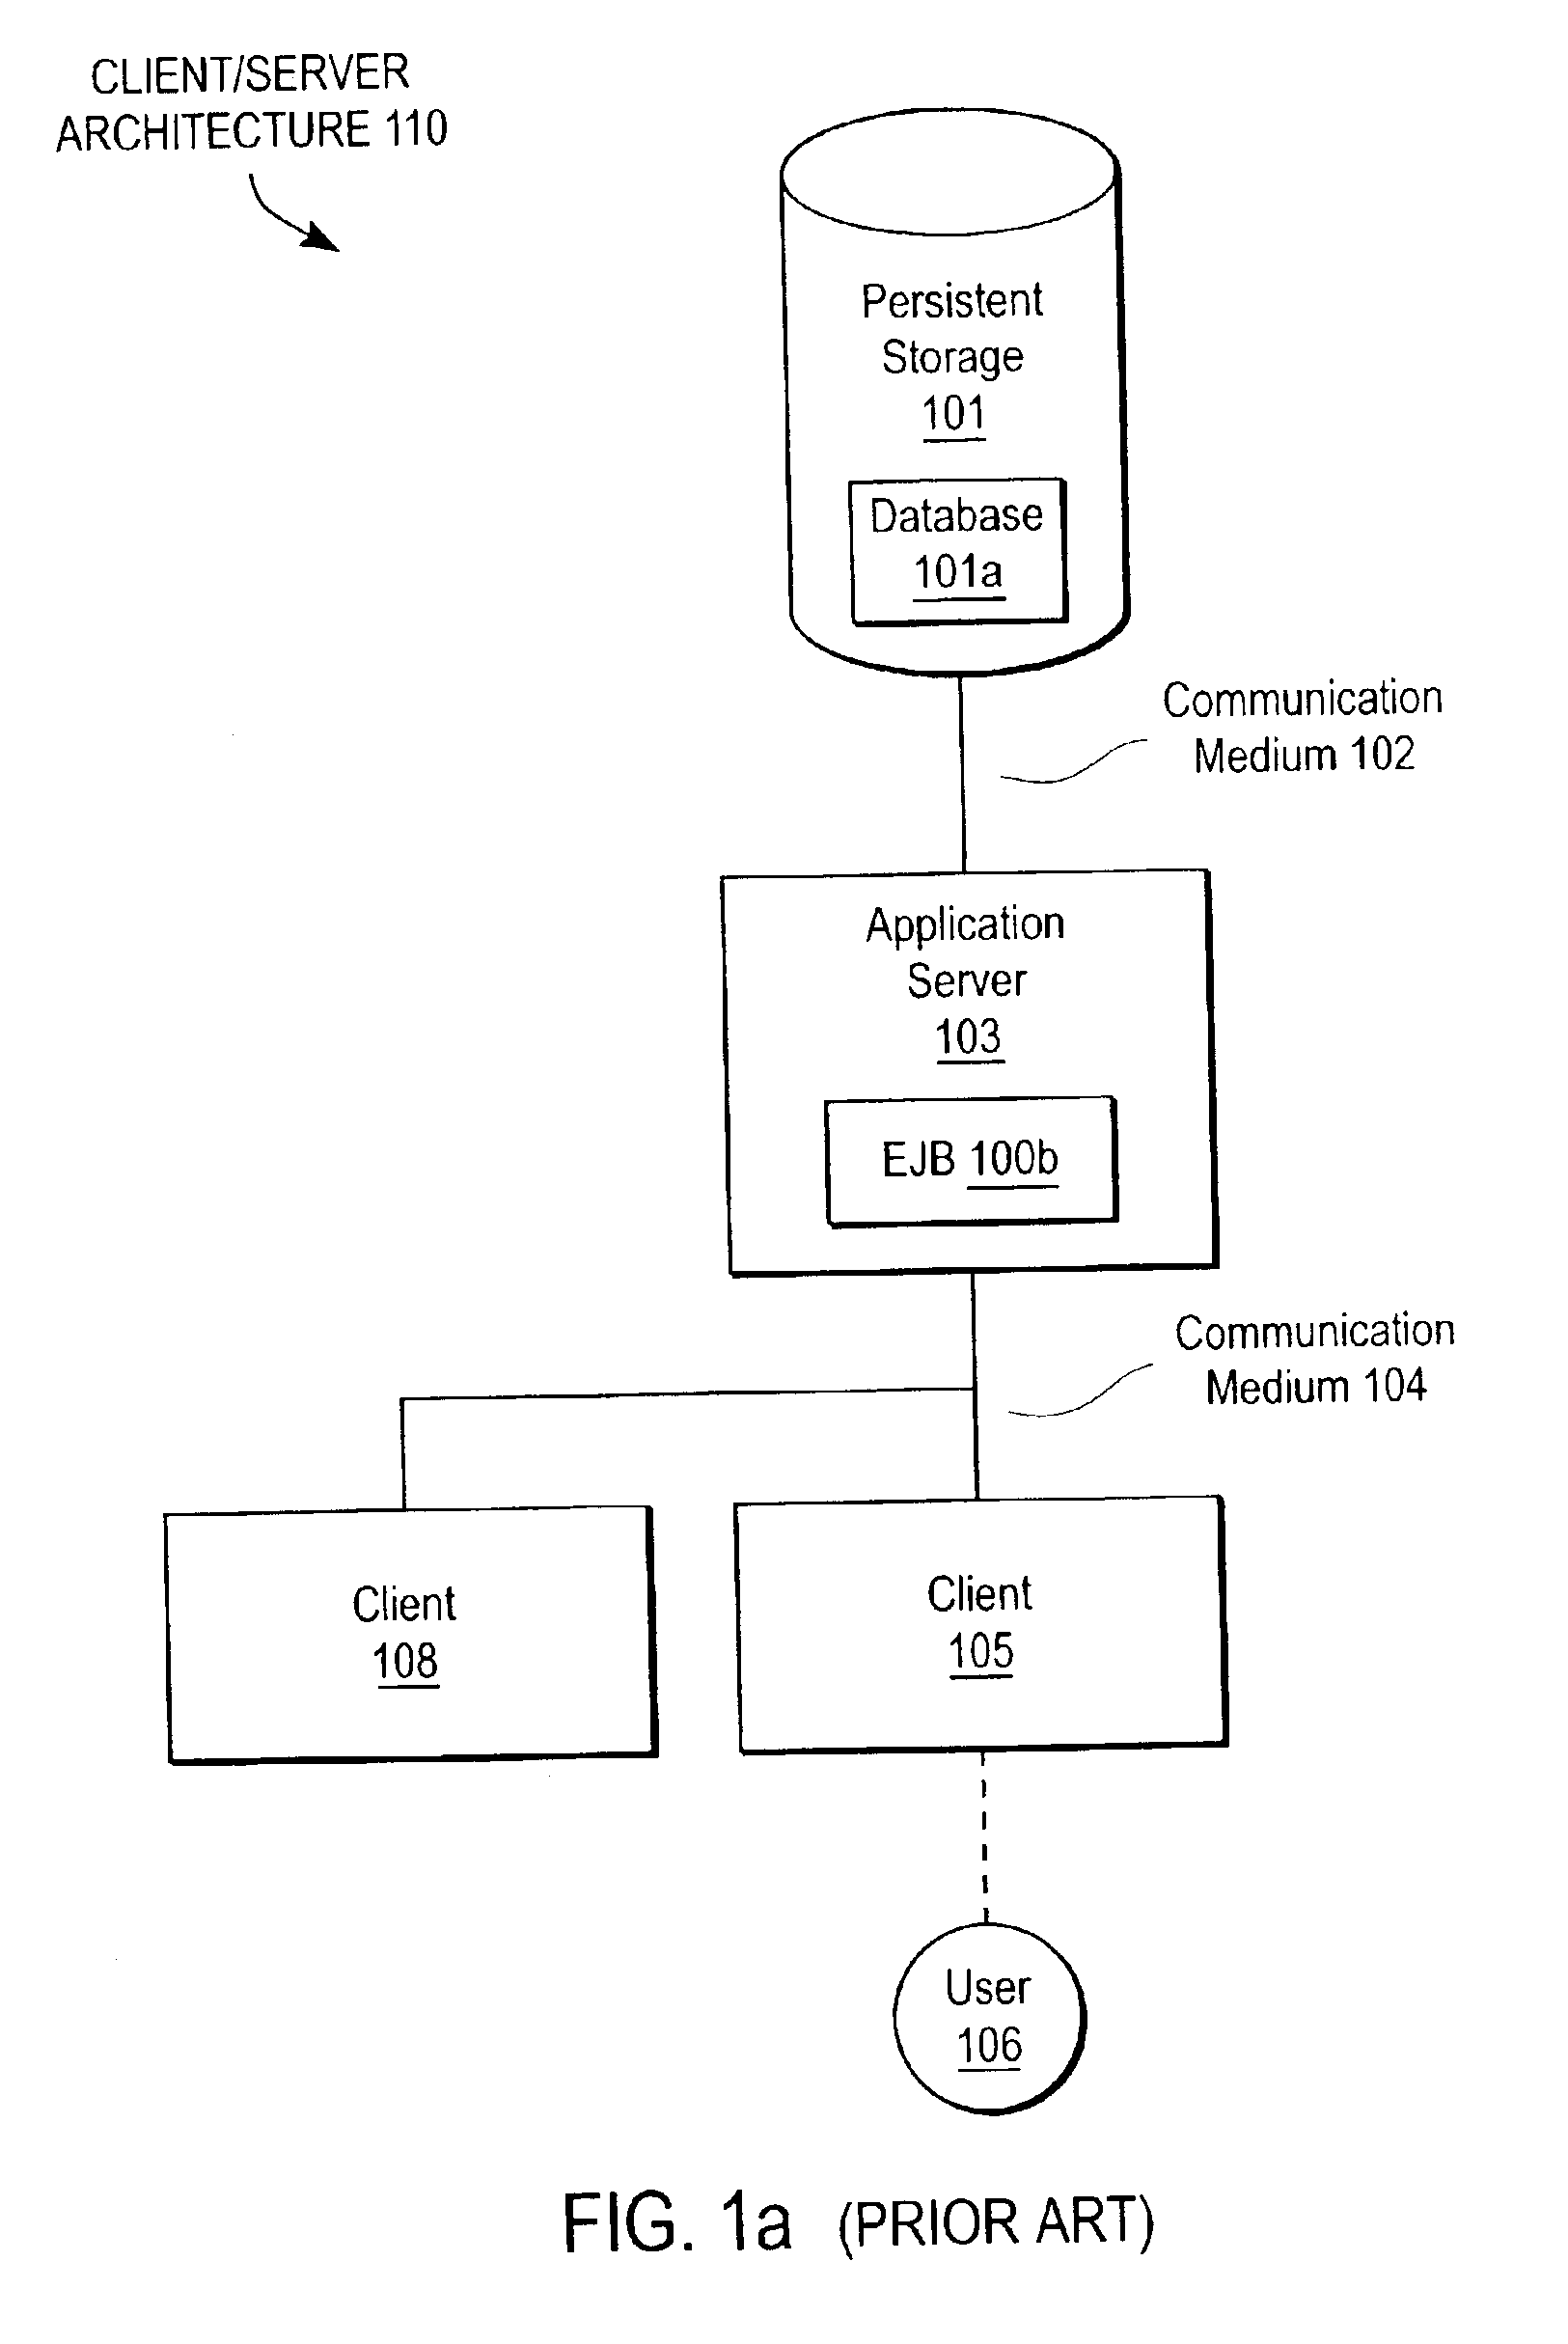 Clustered enterprise Java(TM) in a secure distributed processing system